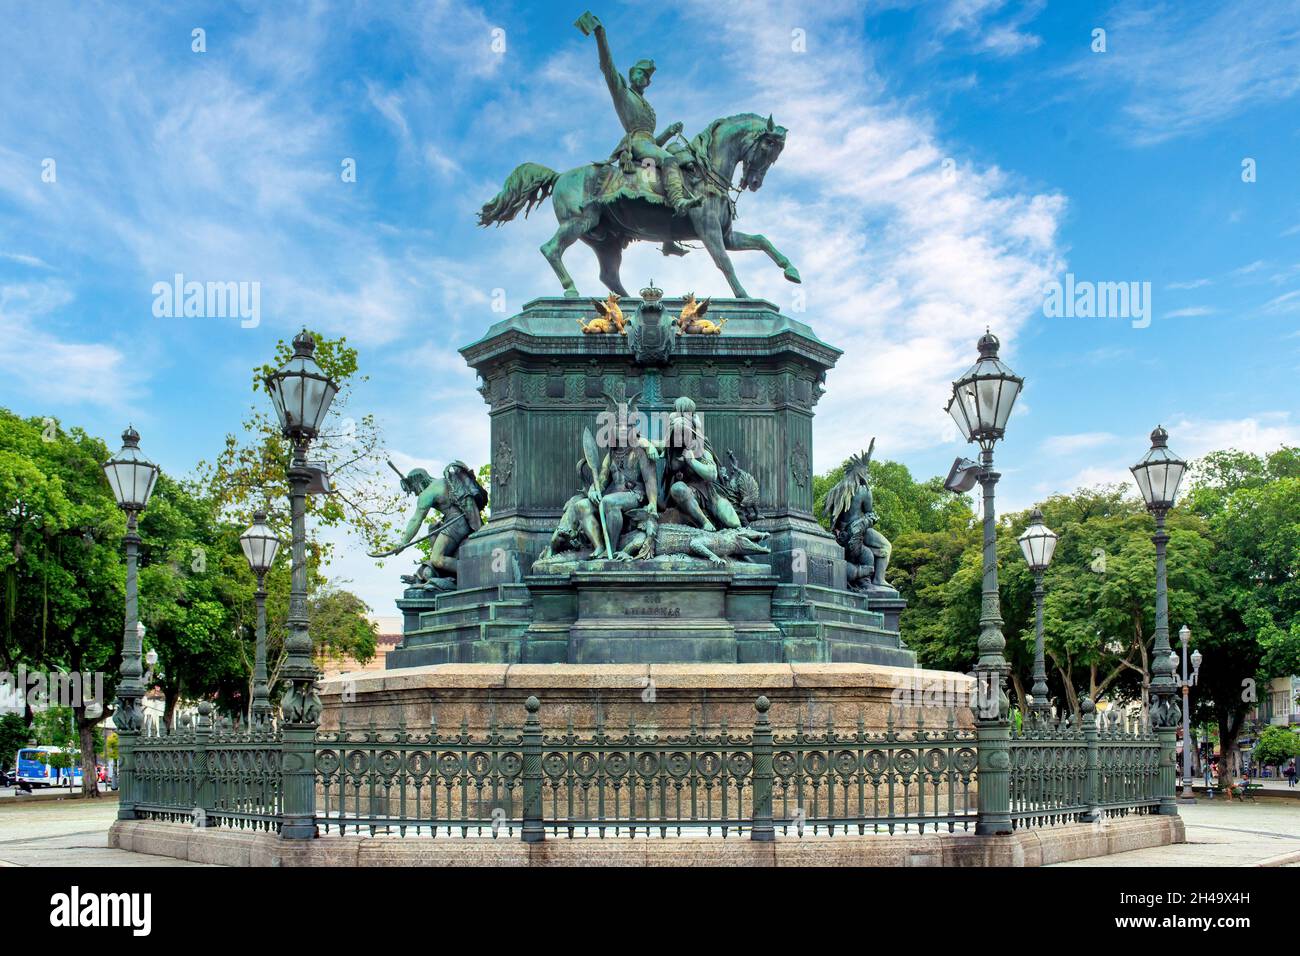 Monument to General San Martin the city center in Rio de Janeiro, Brazil. This famous place is a tourist attraction in the city.Oct. 31, 2021 Stock Photo